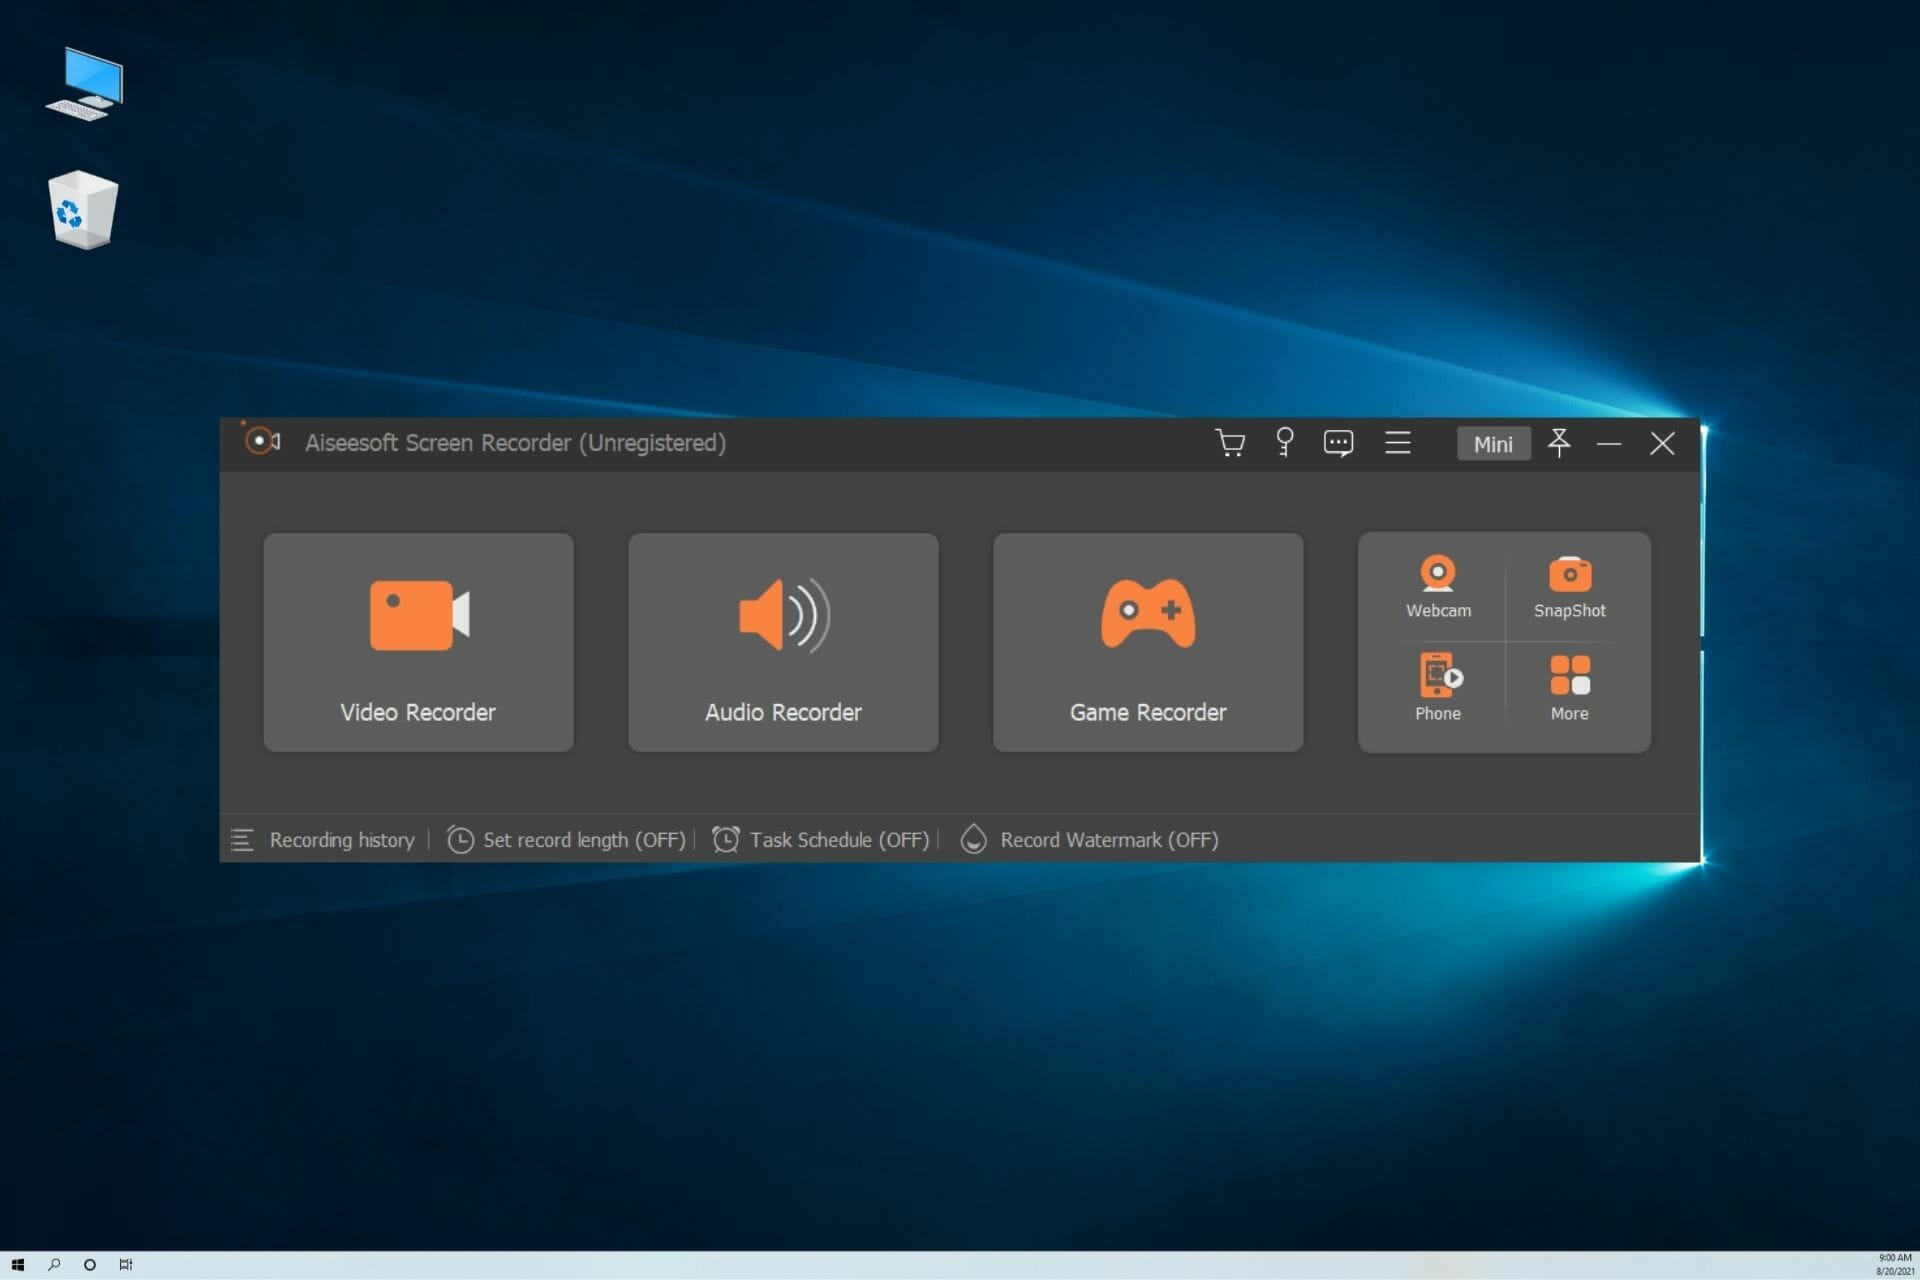 How to record your desktop using Aiseesoft Screen Recorder